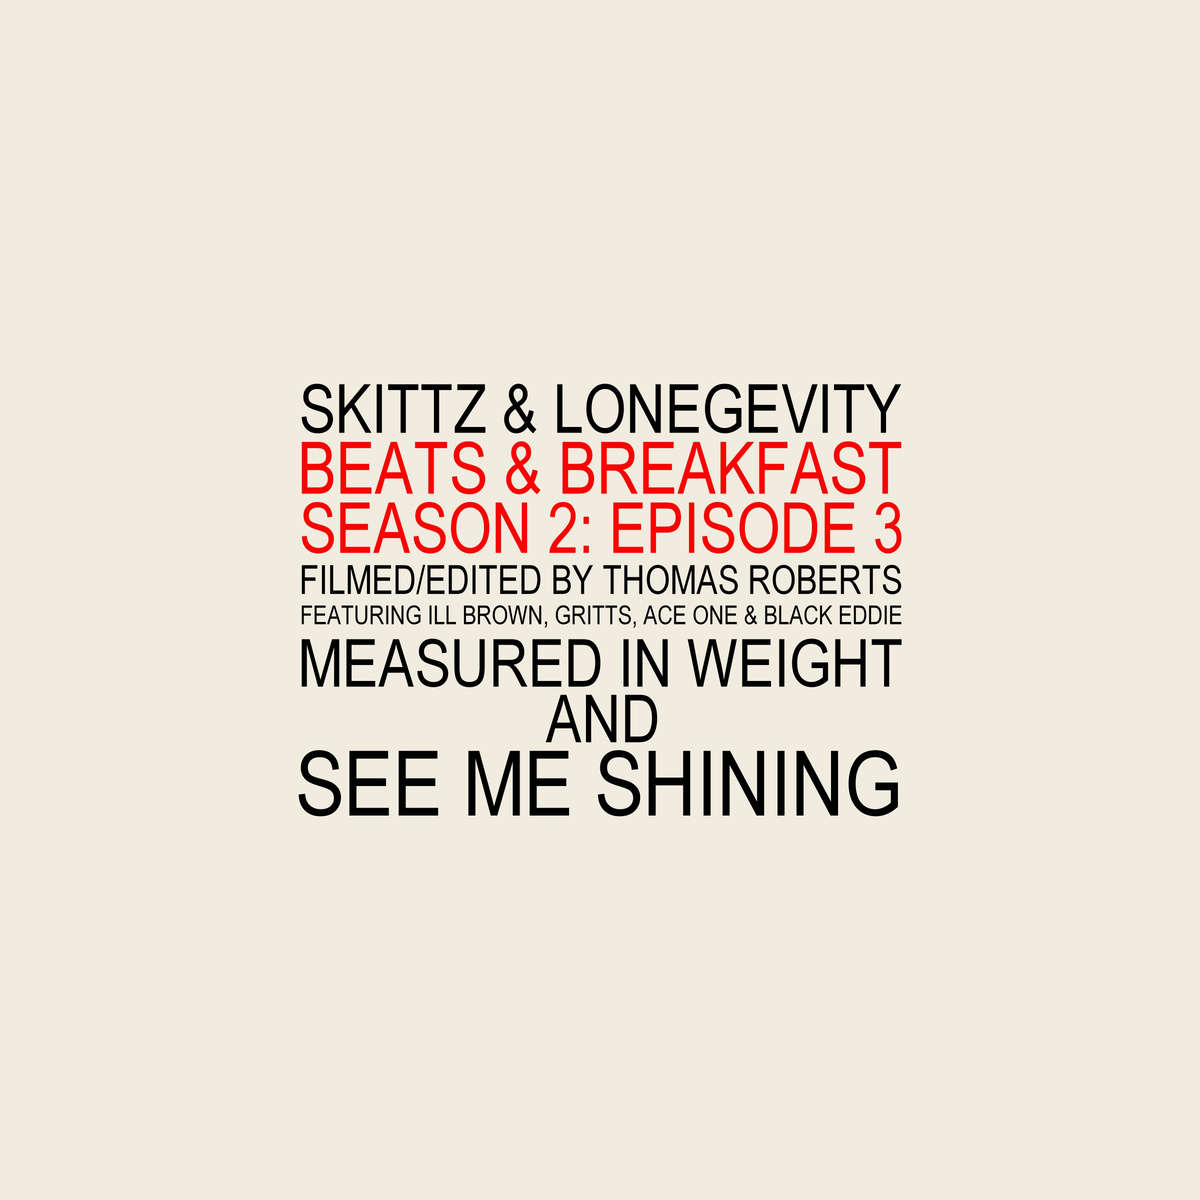 Skittz & LONEgevity Presents Beats & Breakfast S2E3: “Measured In Weight” & "See Me Shining" ft. ILL Brown & Cut Camp